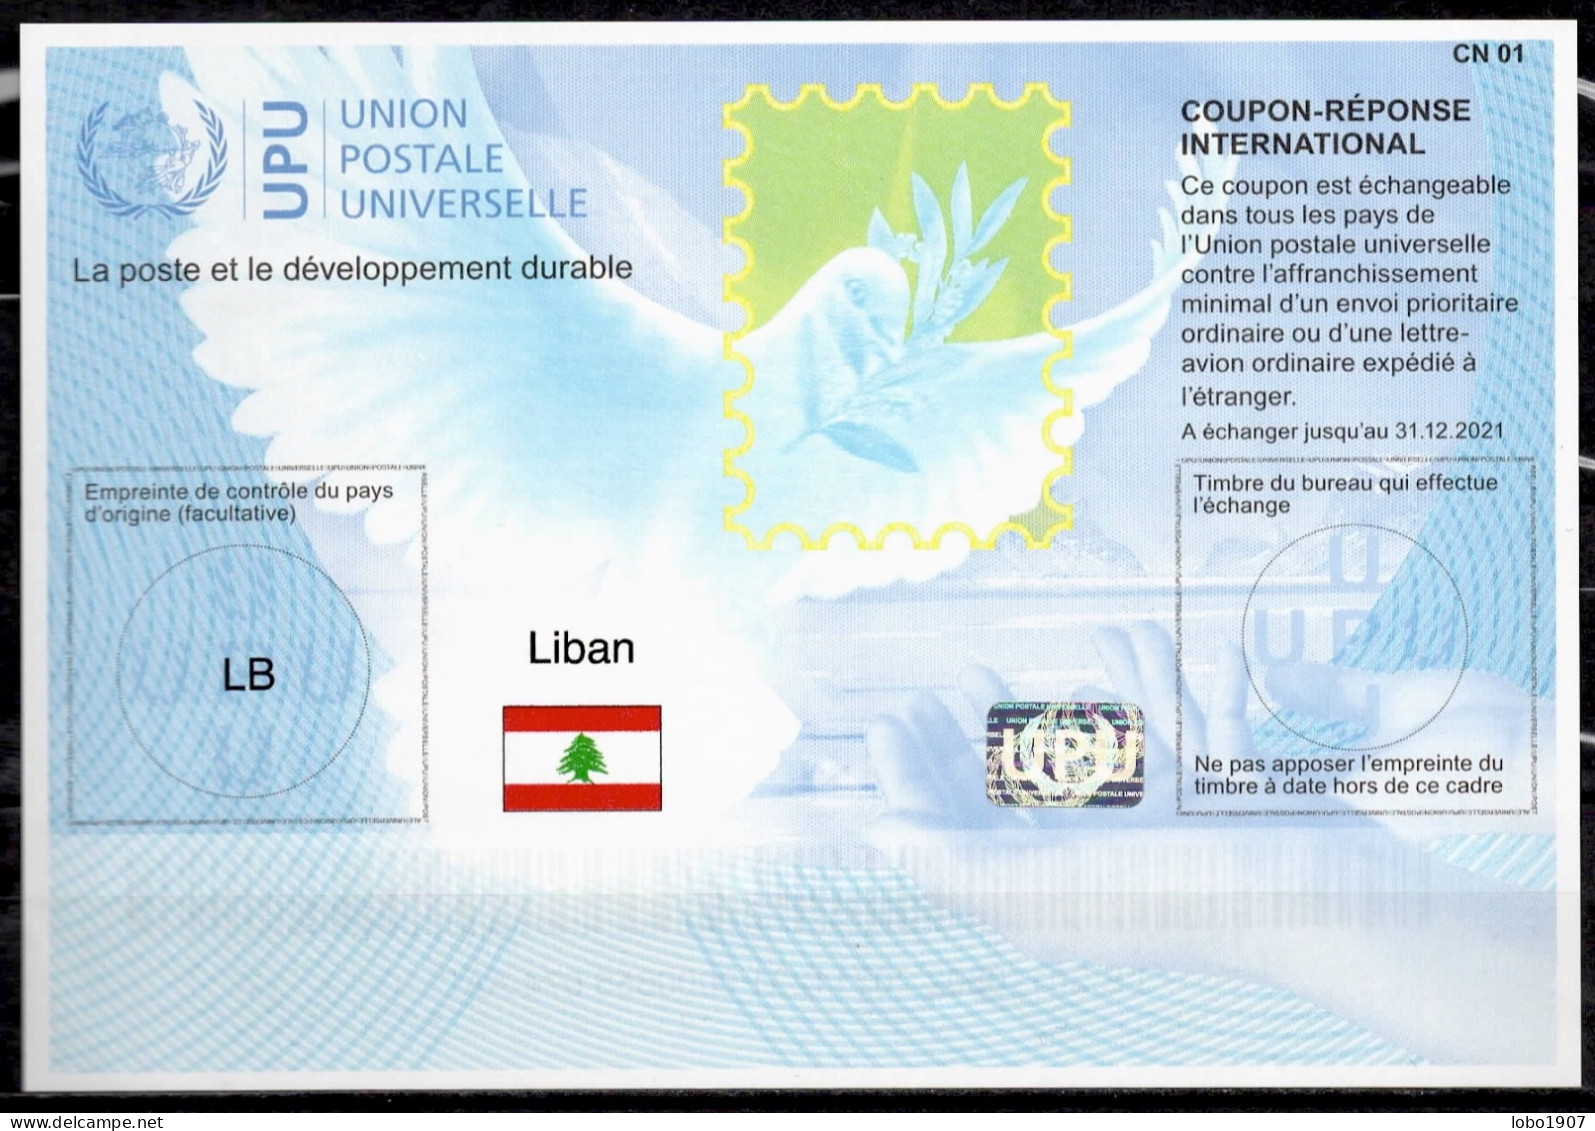 LIBAN LEBANON  Collection 9 International and Arab Union Reply Coupon Reponse Cupon Respuesta IRC IAS see list and scans